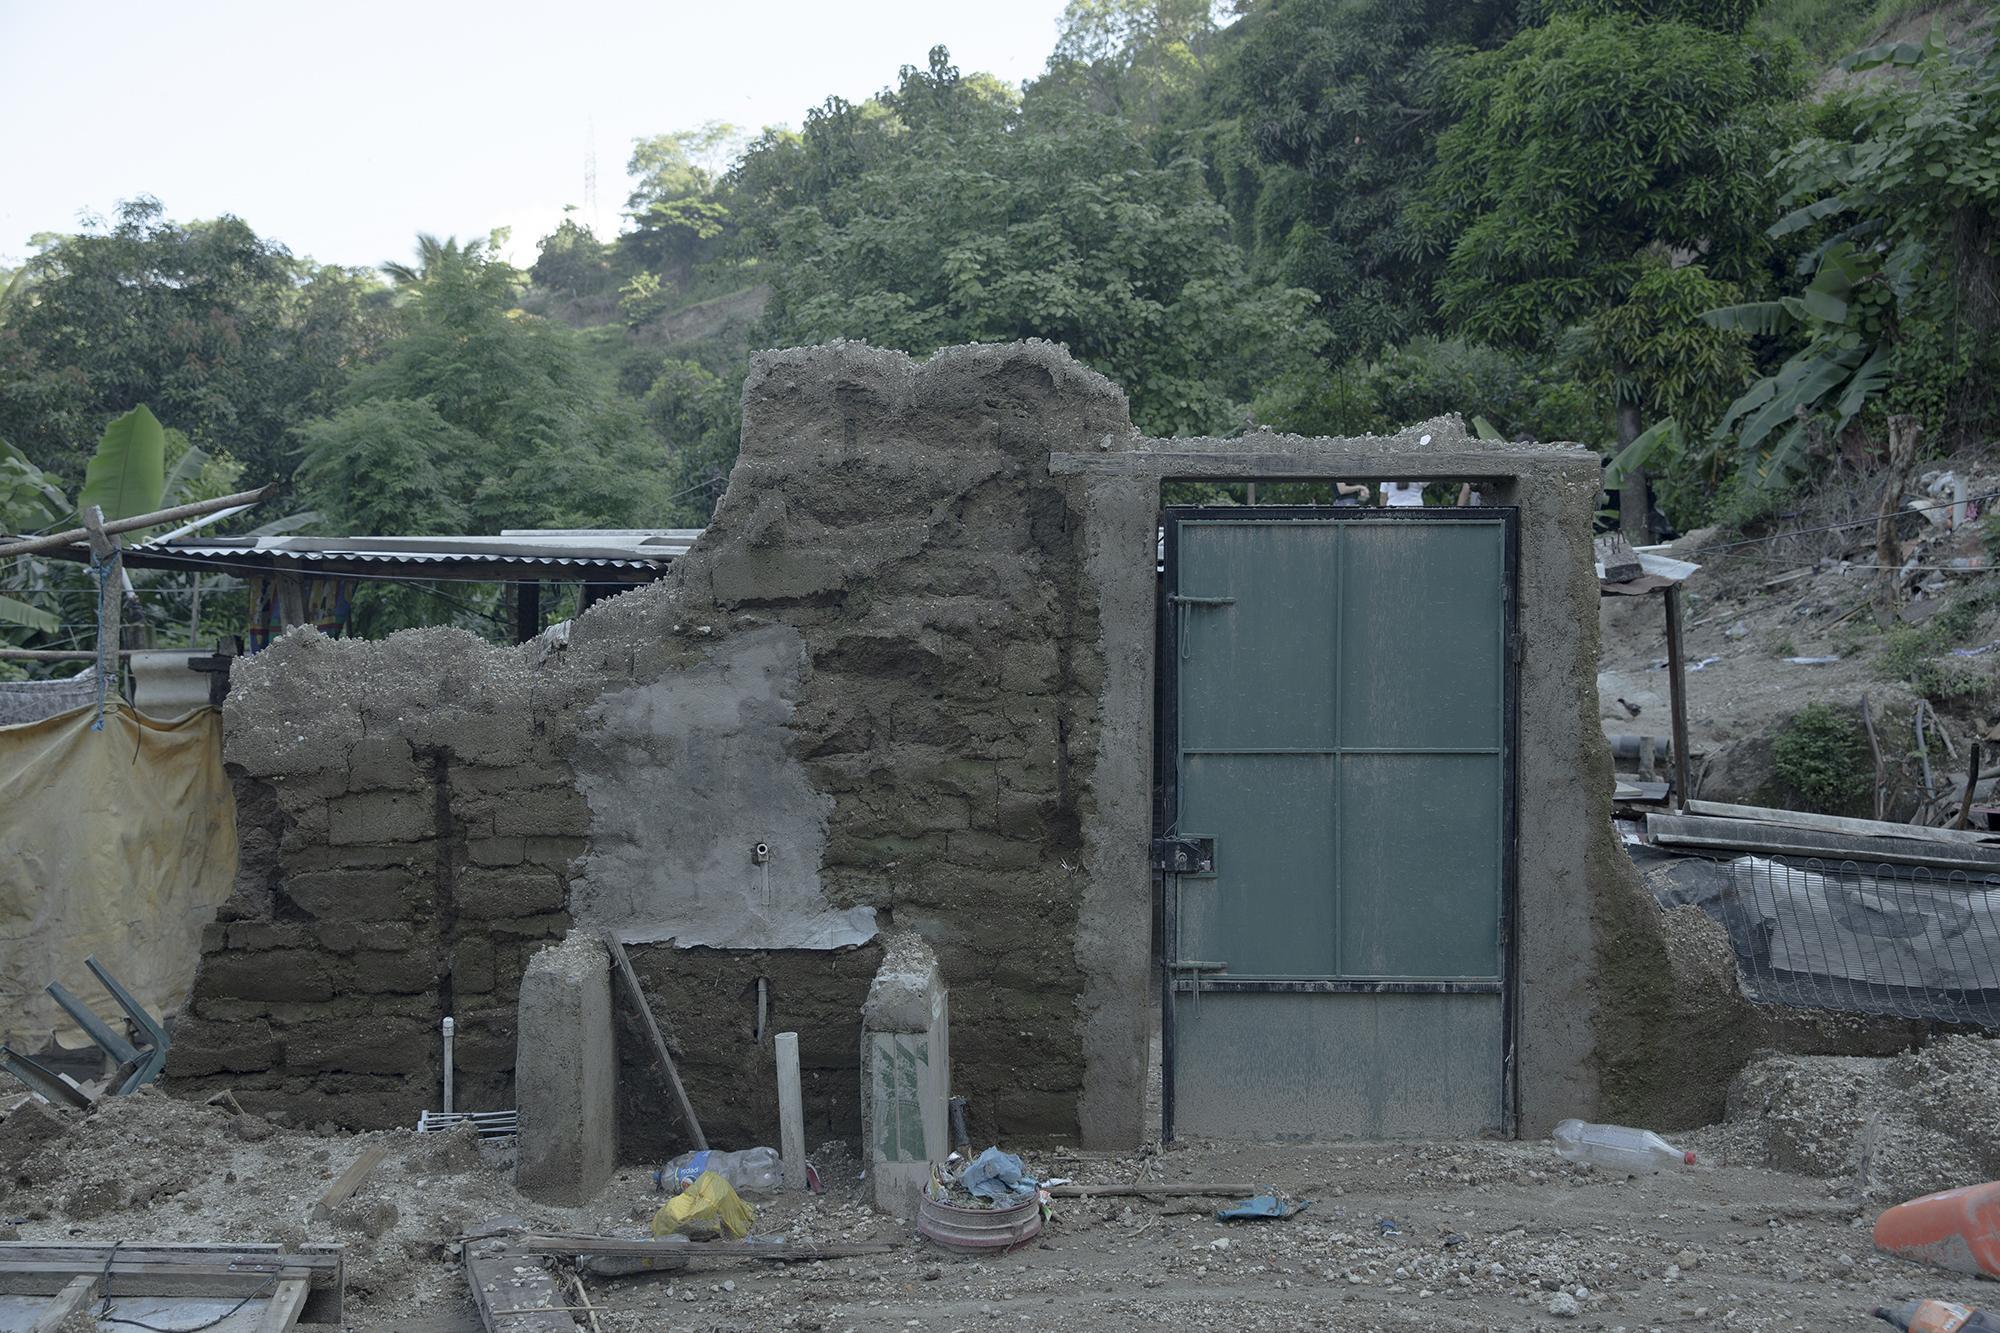 A house in Changallo, which had already weathered the rains of 2019, gave in under the weight of Tropical Storm Amanda. Only one section of the walling and the door were left standing. Photo: Carlos Barrera/El Faro